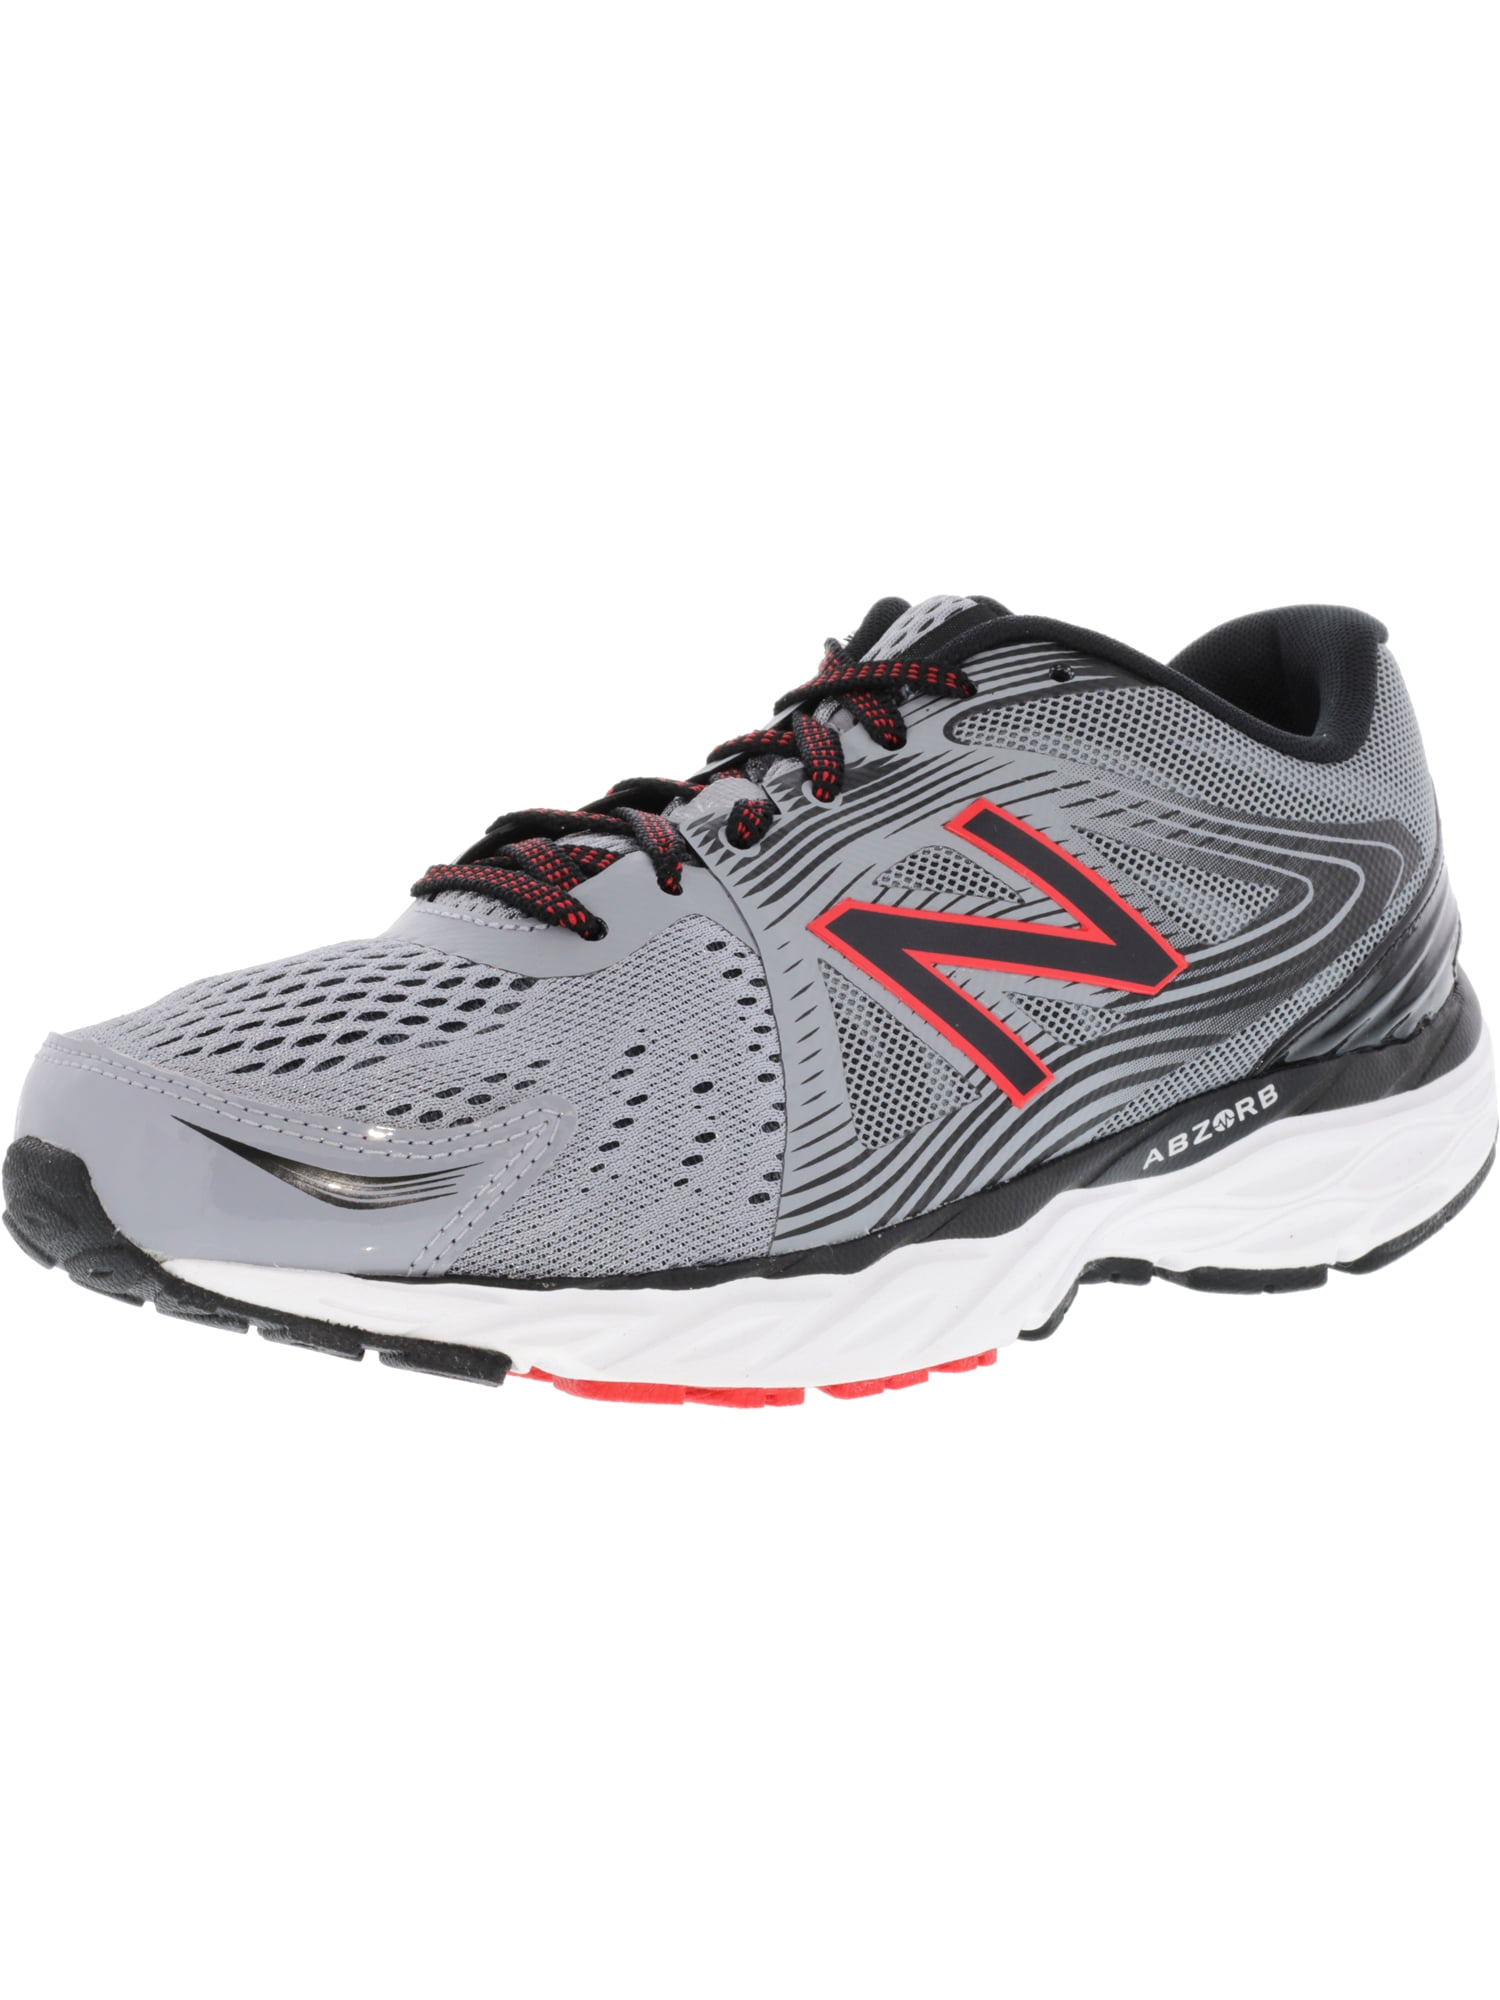 New Balance Men's M680 Lg4 Ankle-High Leather Running Shoe - 7.5WW ...